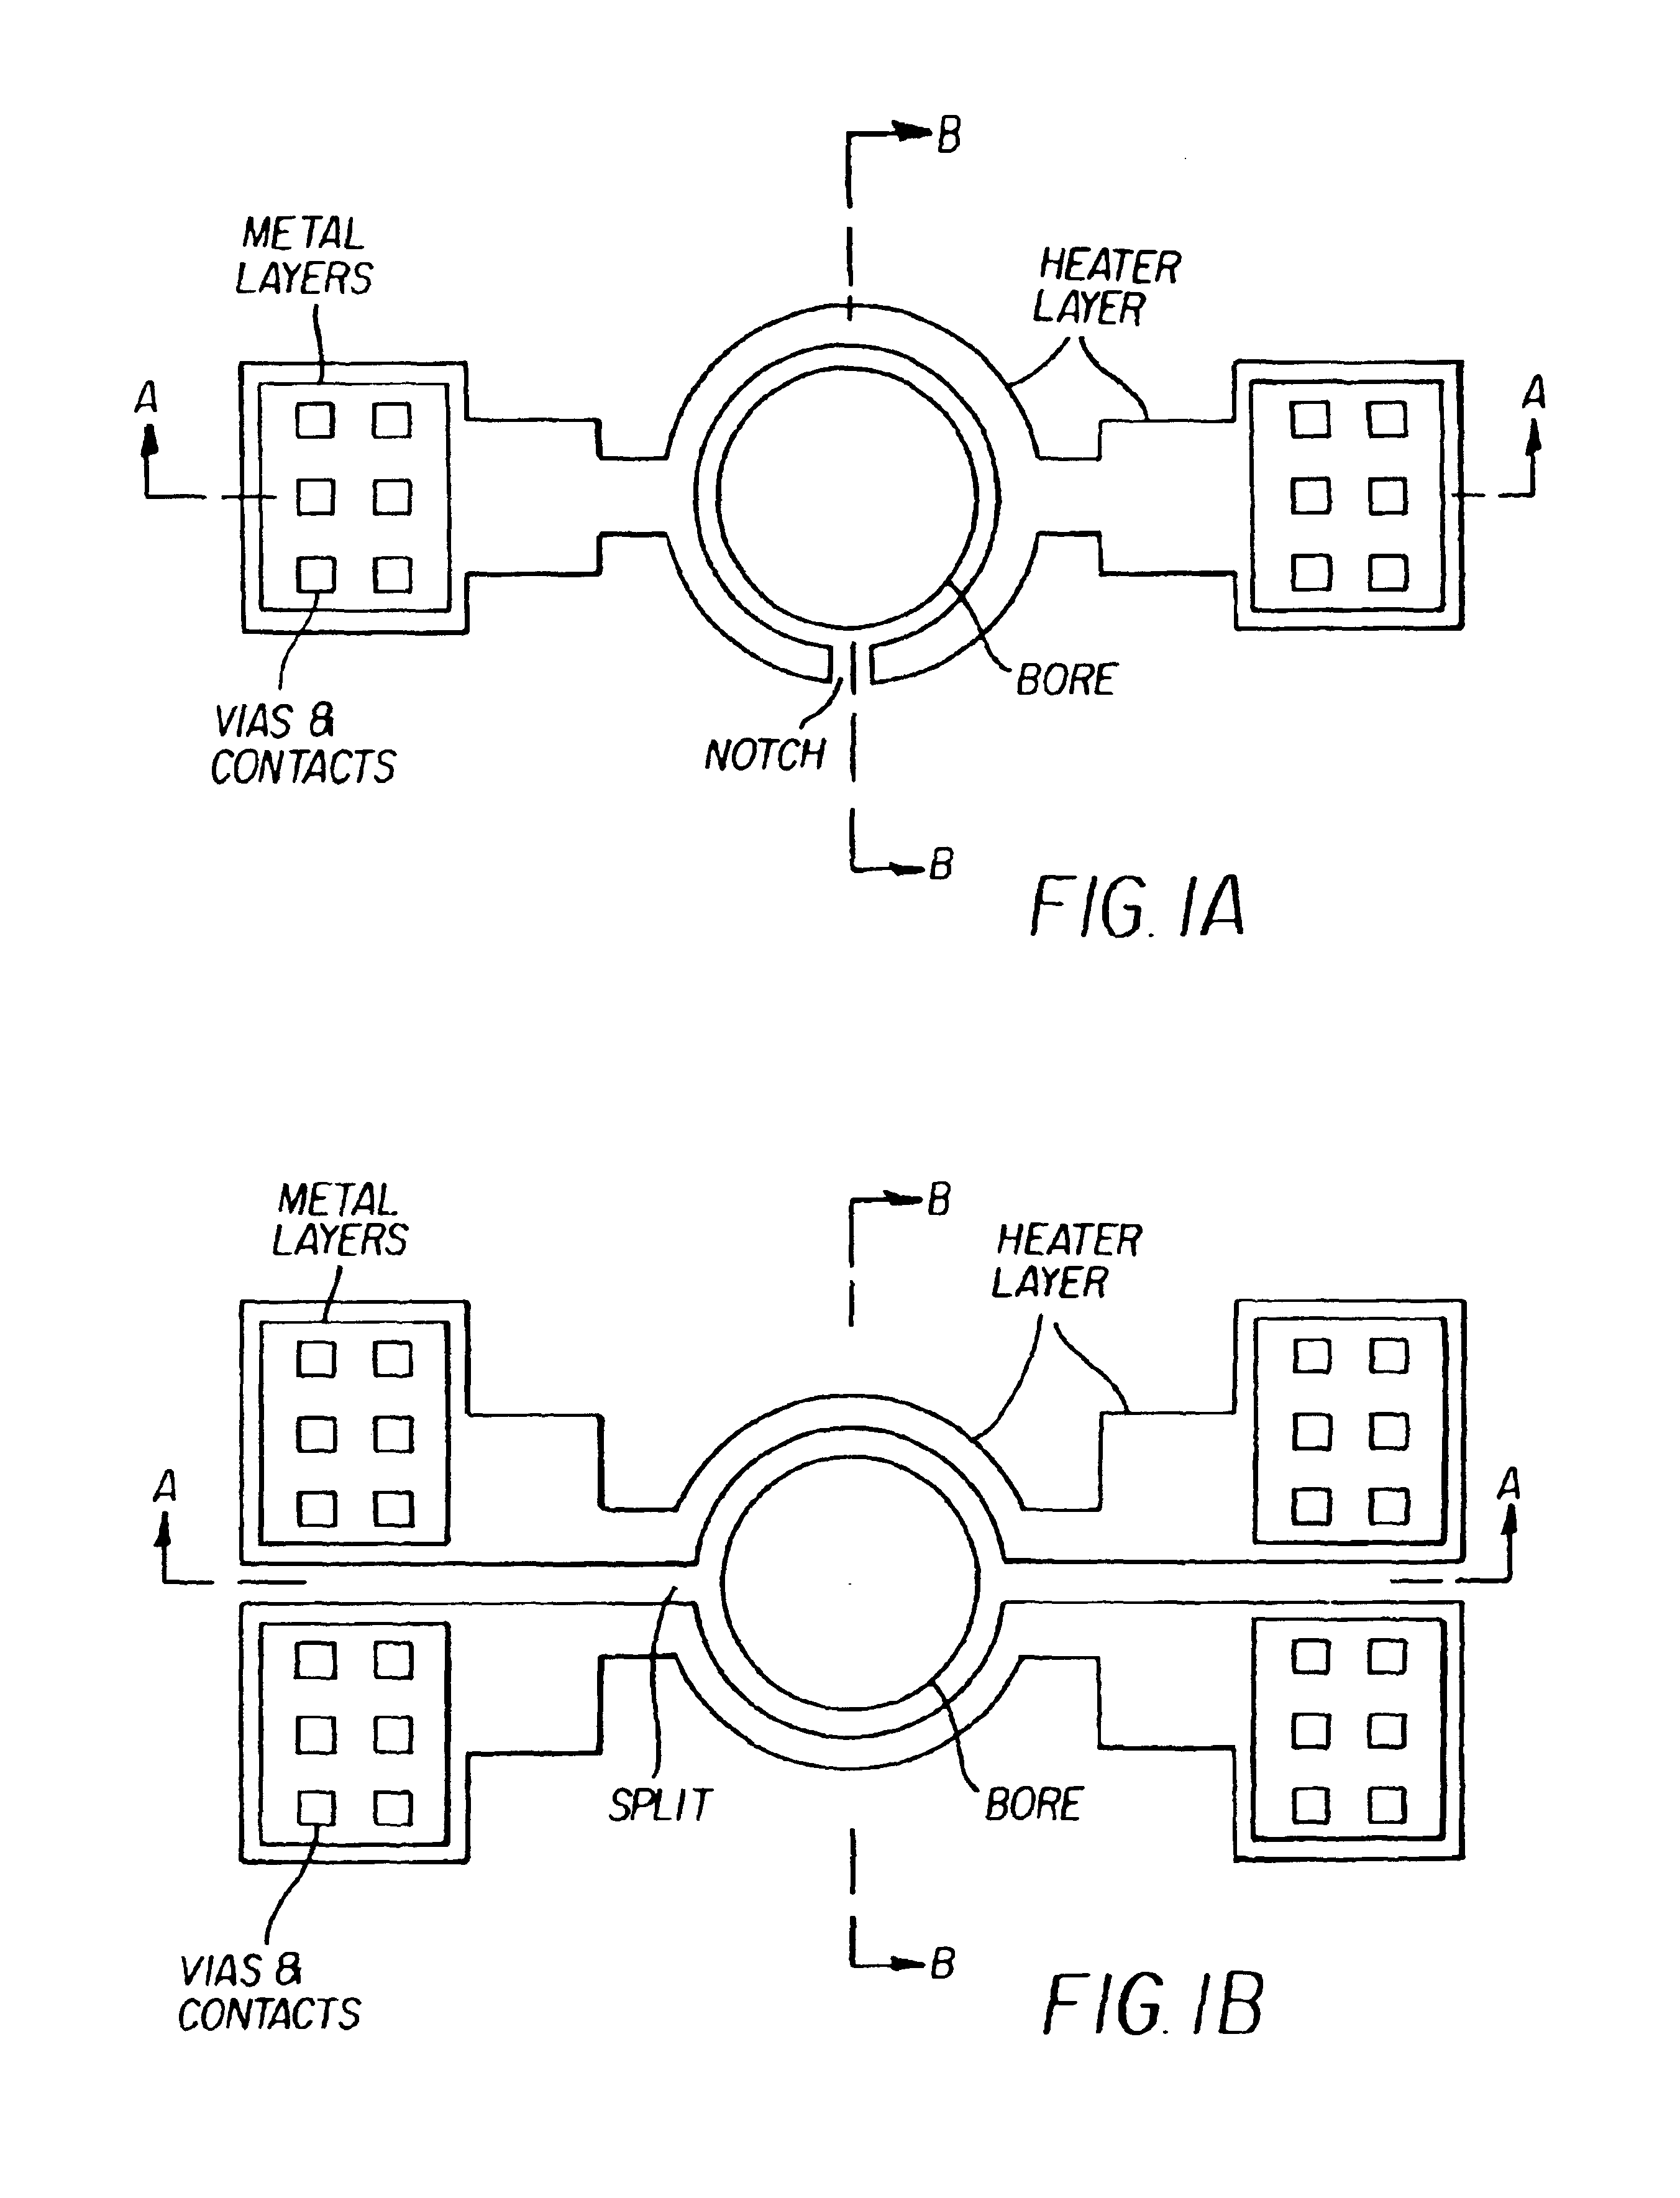 CMOS/MEMS integrated ink jet print head and method of forming same